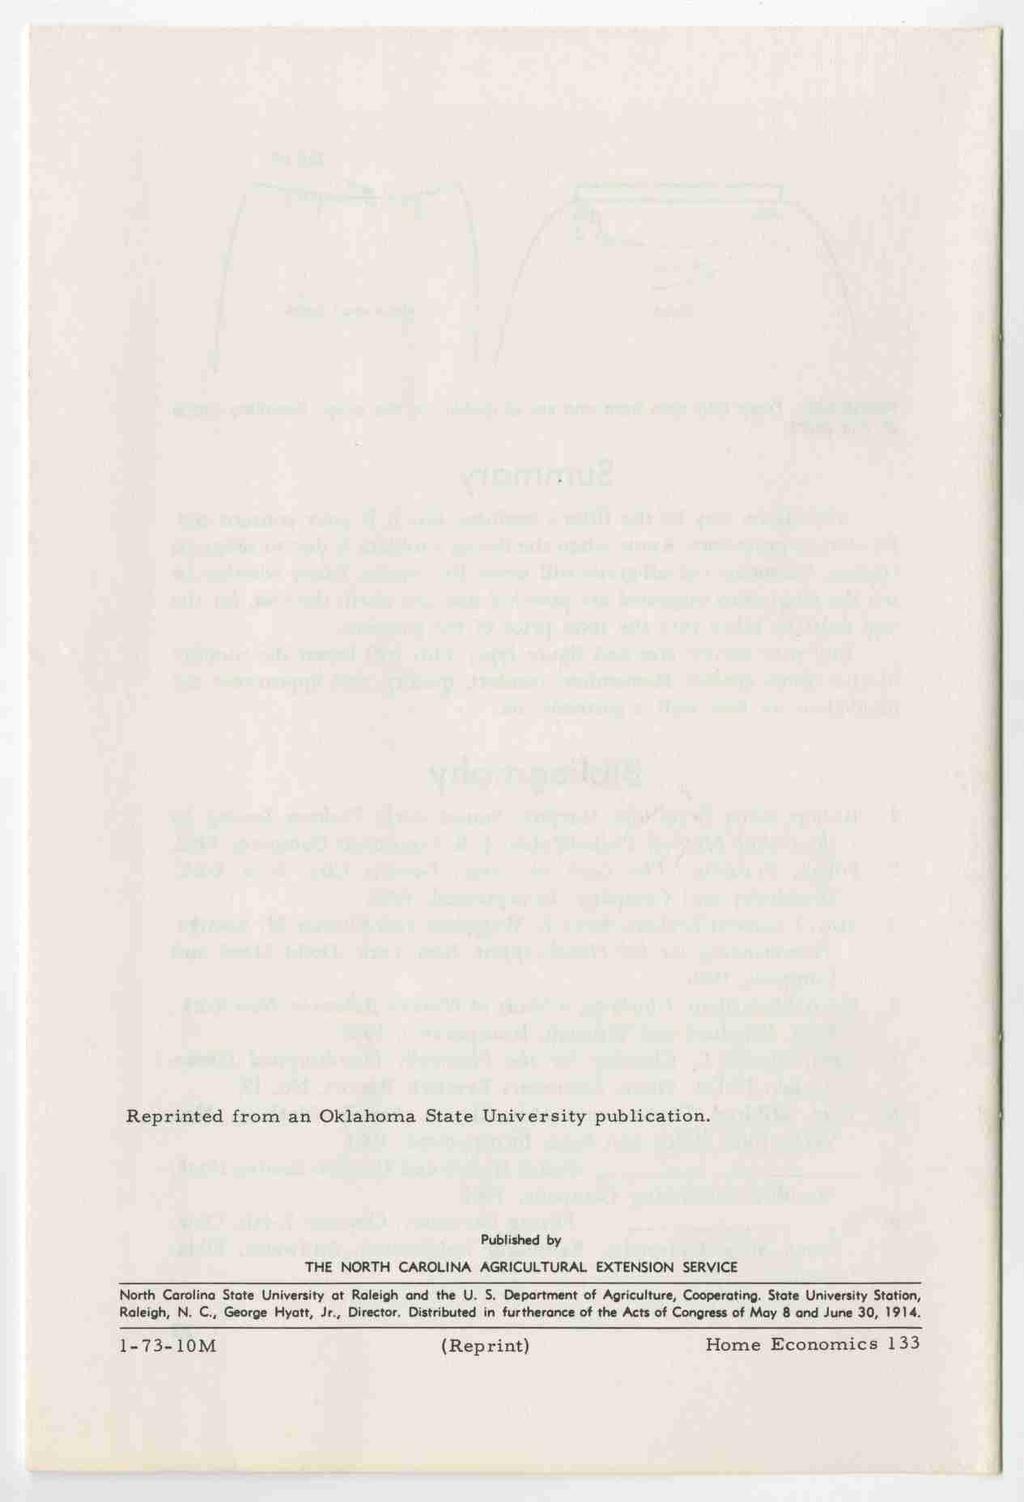 Reprinted from an Oklahoma State University publication. Published by THE NORTH CAROLINA AGRICULTURAL EXTENSION SERVICE North Carolina State University at Raleigh and the U. S. Department of Agriculture, Cooperating.